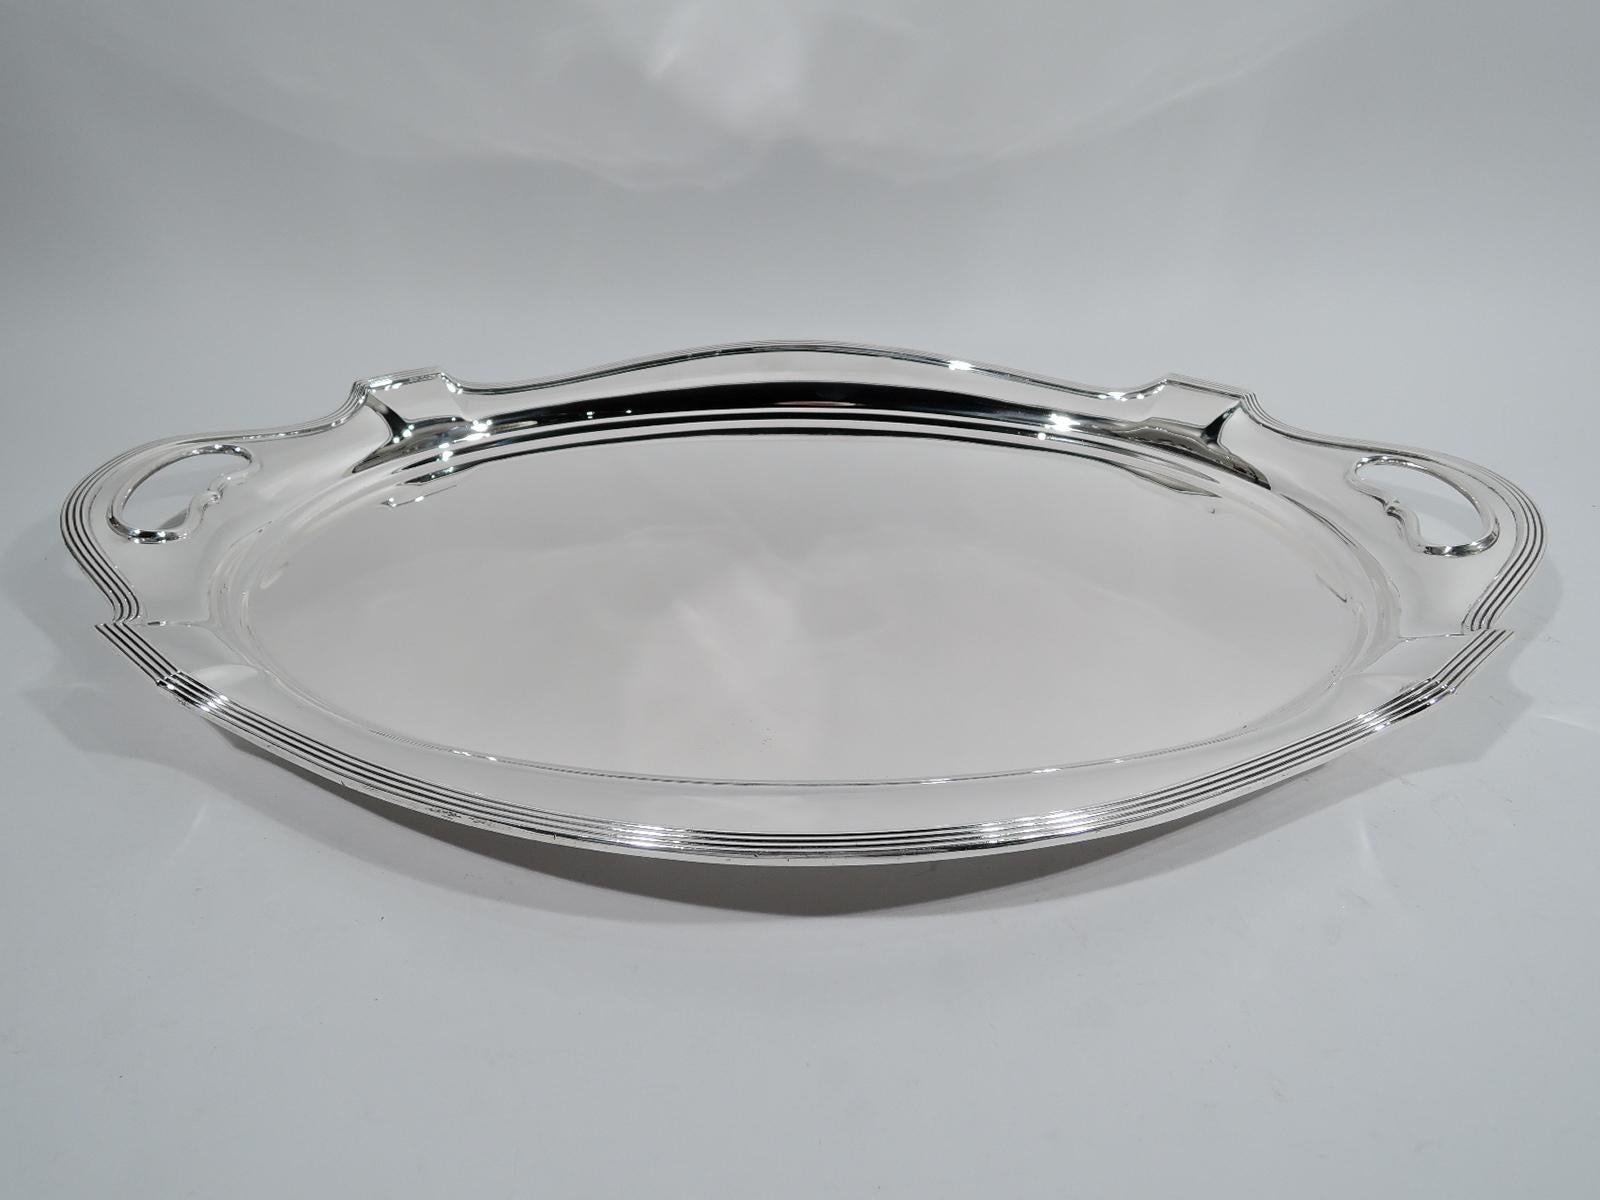 Plymouth sterling silver tea tray. Made by Gorham in Providence in 1950. Oval well and reeded and curvilinear rim; cutout kidney end handles. Fully marked including maker’s stamp, date code, and pattern name and no. 2816. Weight: 106 troy ounces.